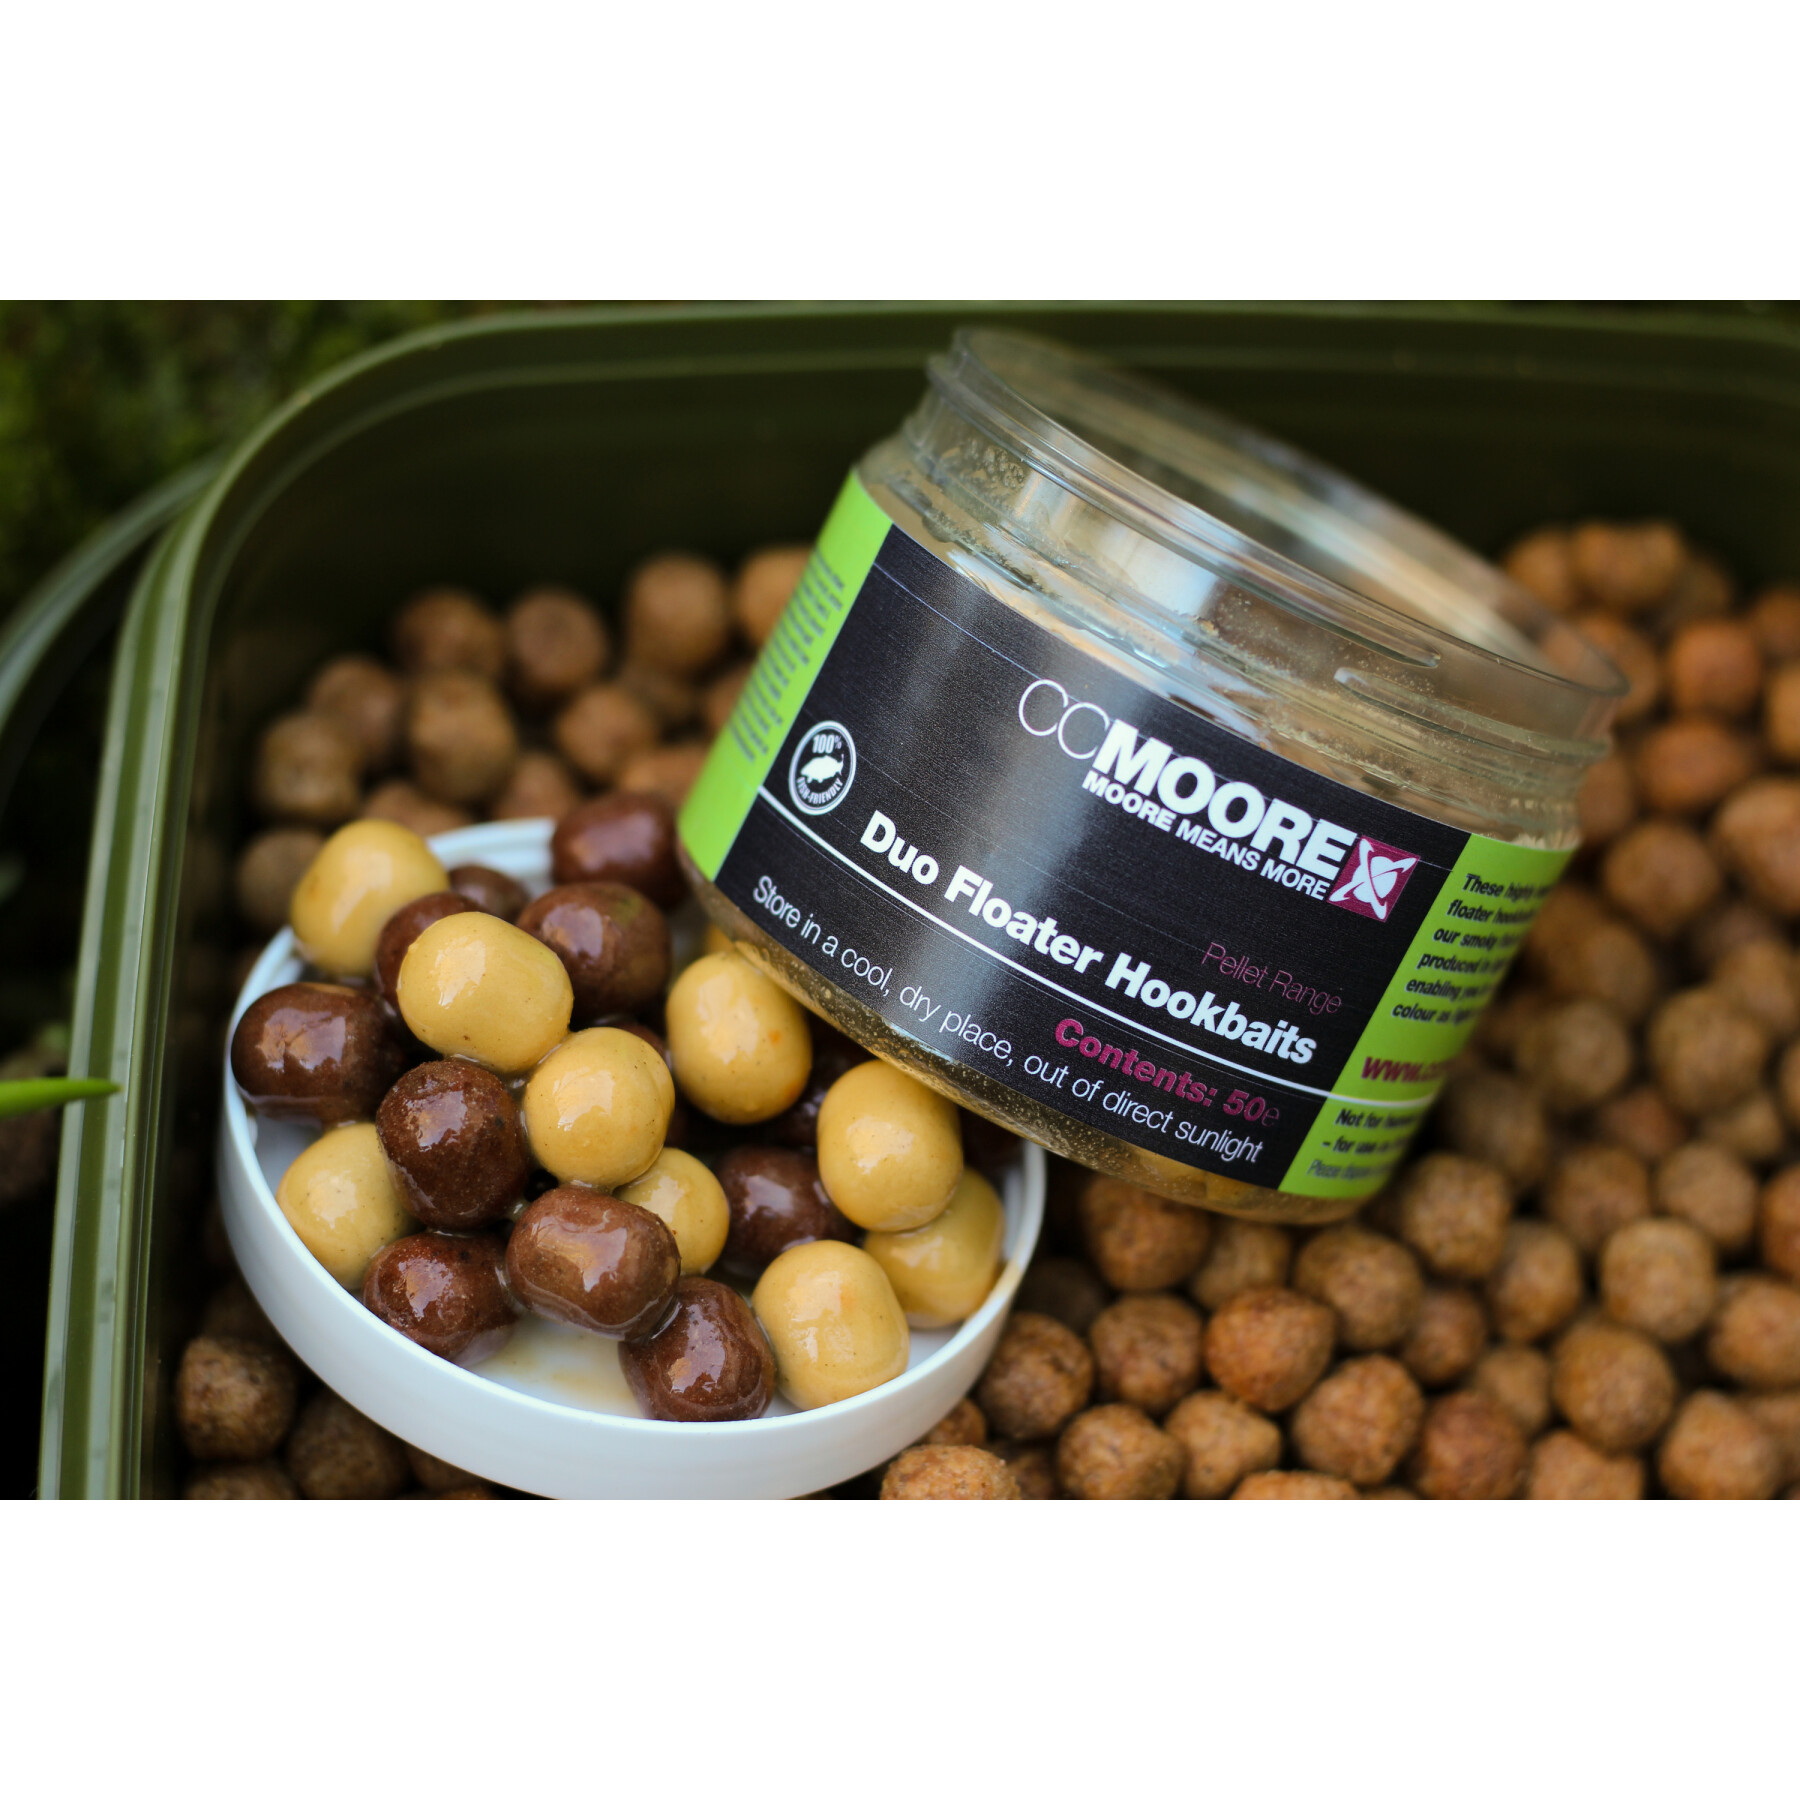 CCMoore Duo Floater Hookbaits (50)